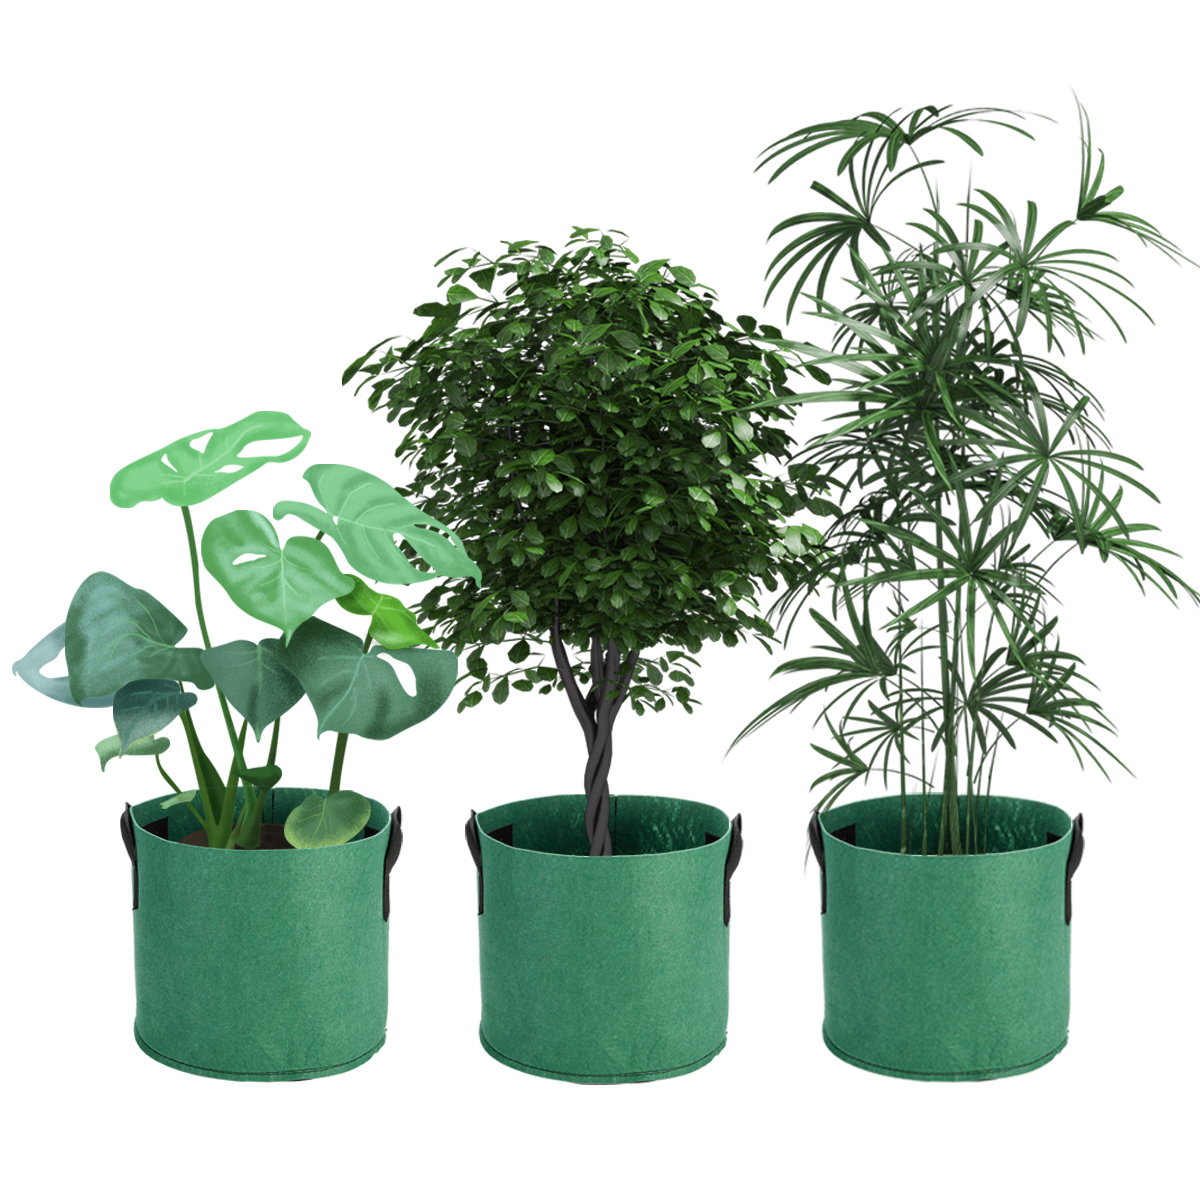 Find 1/2/3/5/7/10Gallon Felt Non Woven Pots Plant Grow Bag Planting Pouch Container Nursery Seedling Planting Breathable Barrel for Sale on Gipsybee.com with cryptocurrencies